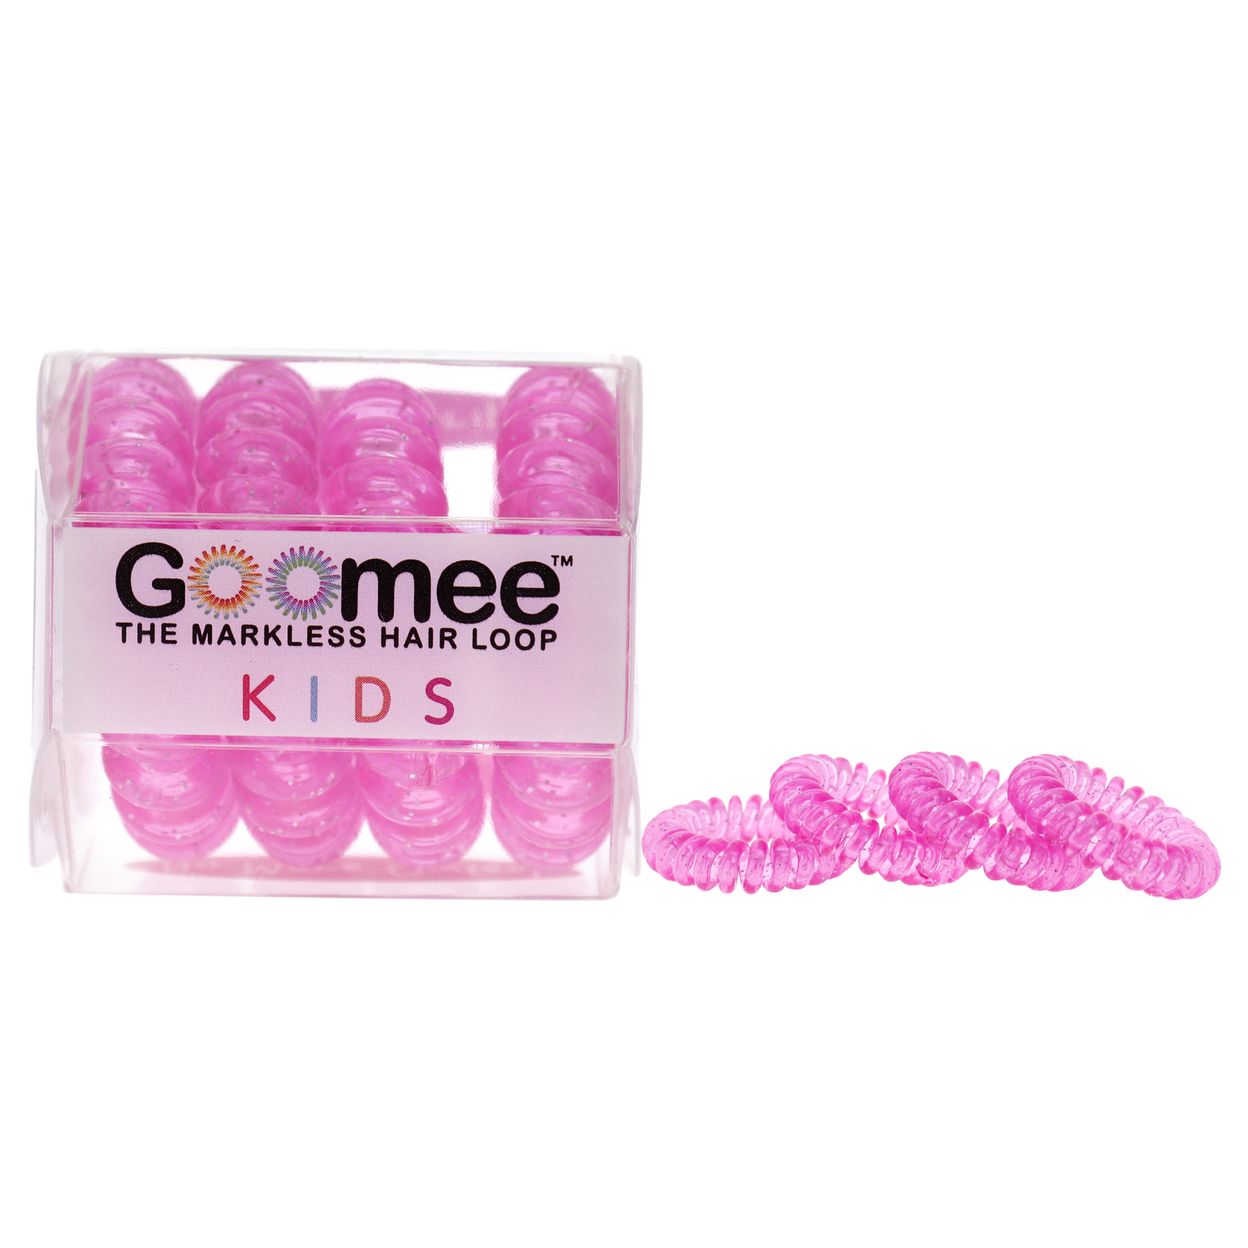 Goomee Kids The Markless Hair Loop Set - Once Upon A Dream Hair Tie 4 Pc